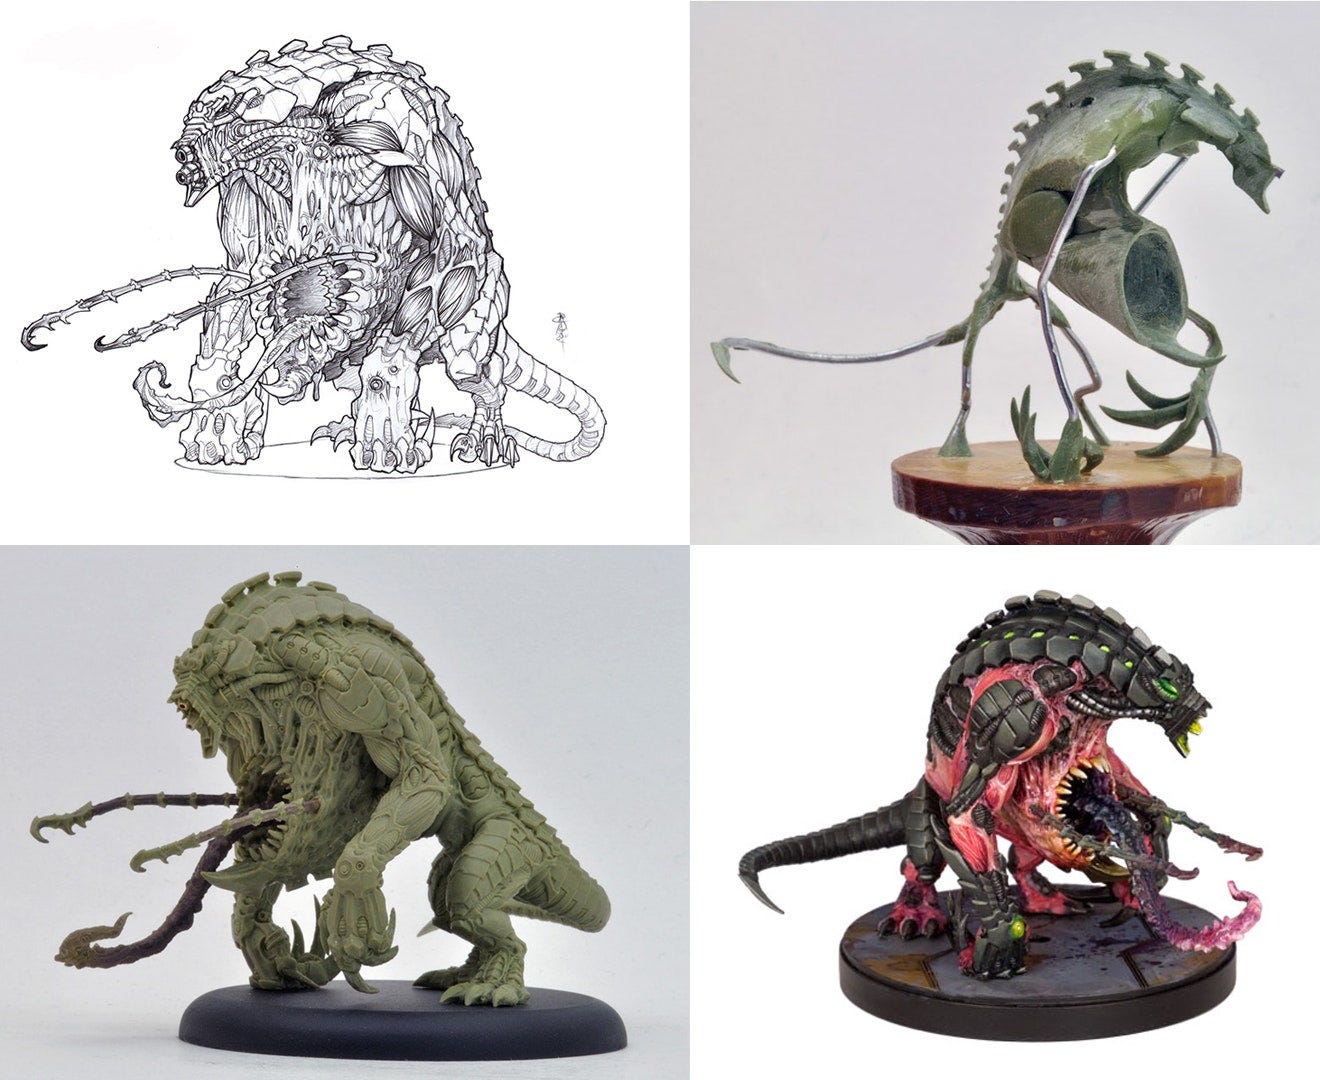 Think Big! A Company Selling Miniatures Finds Massive Success | WIRED